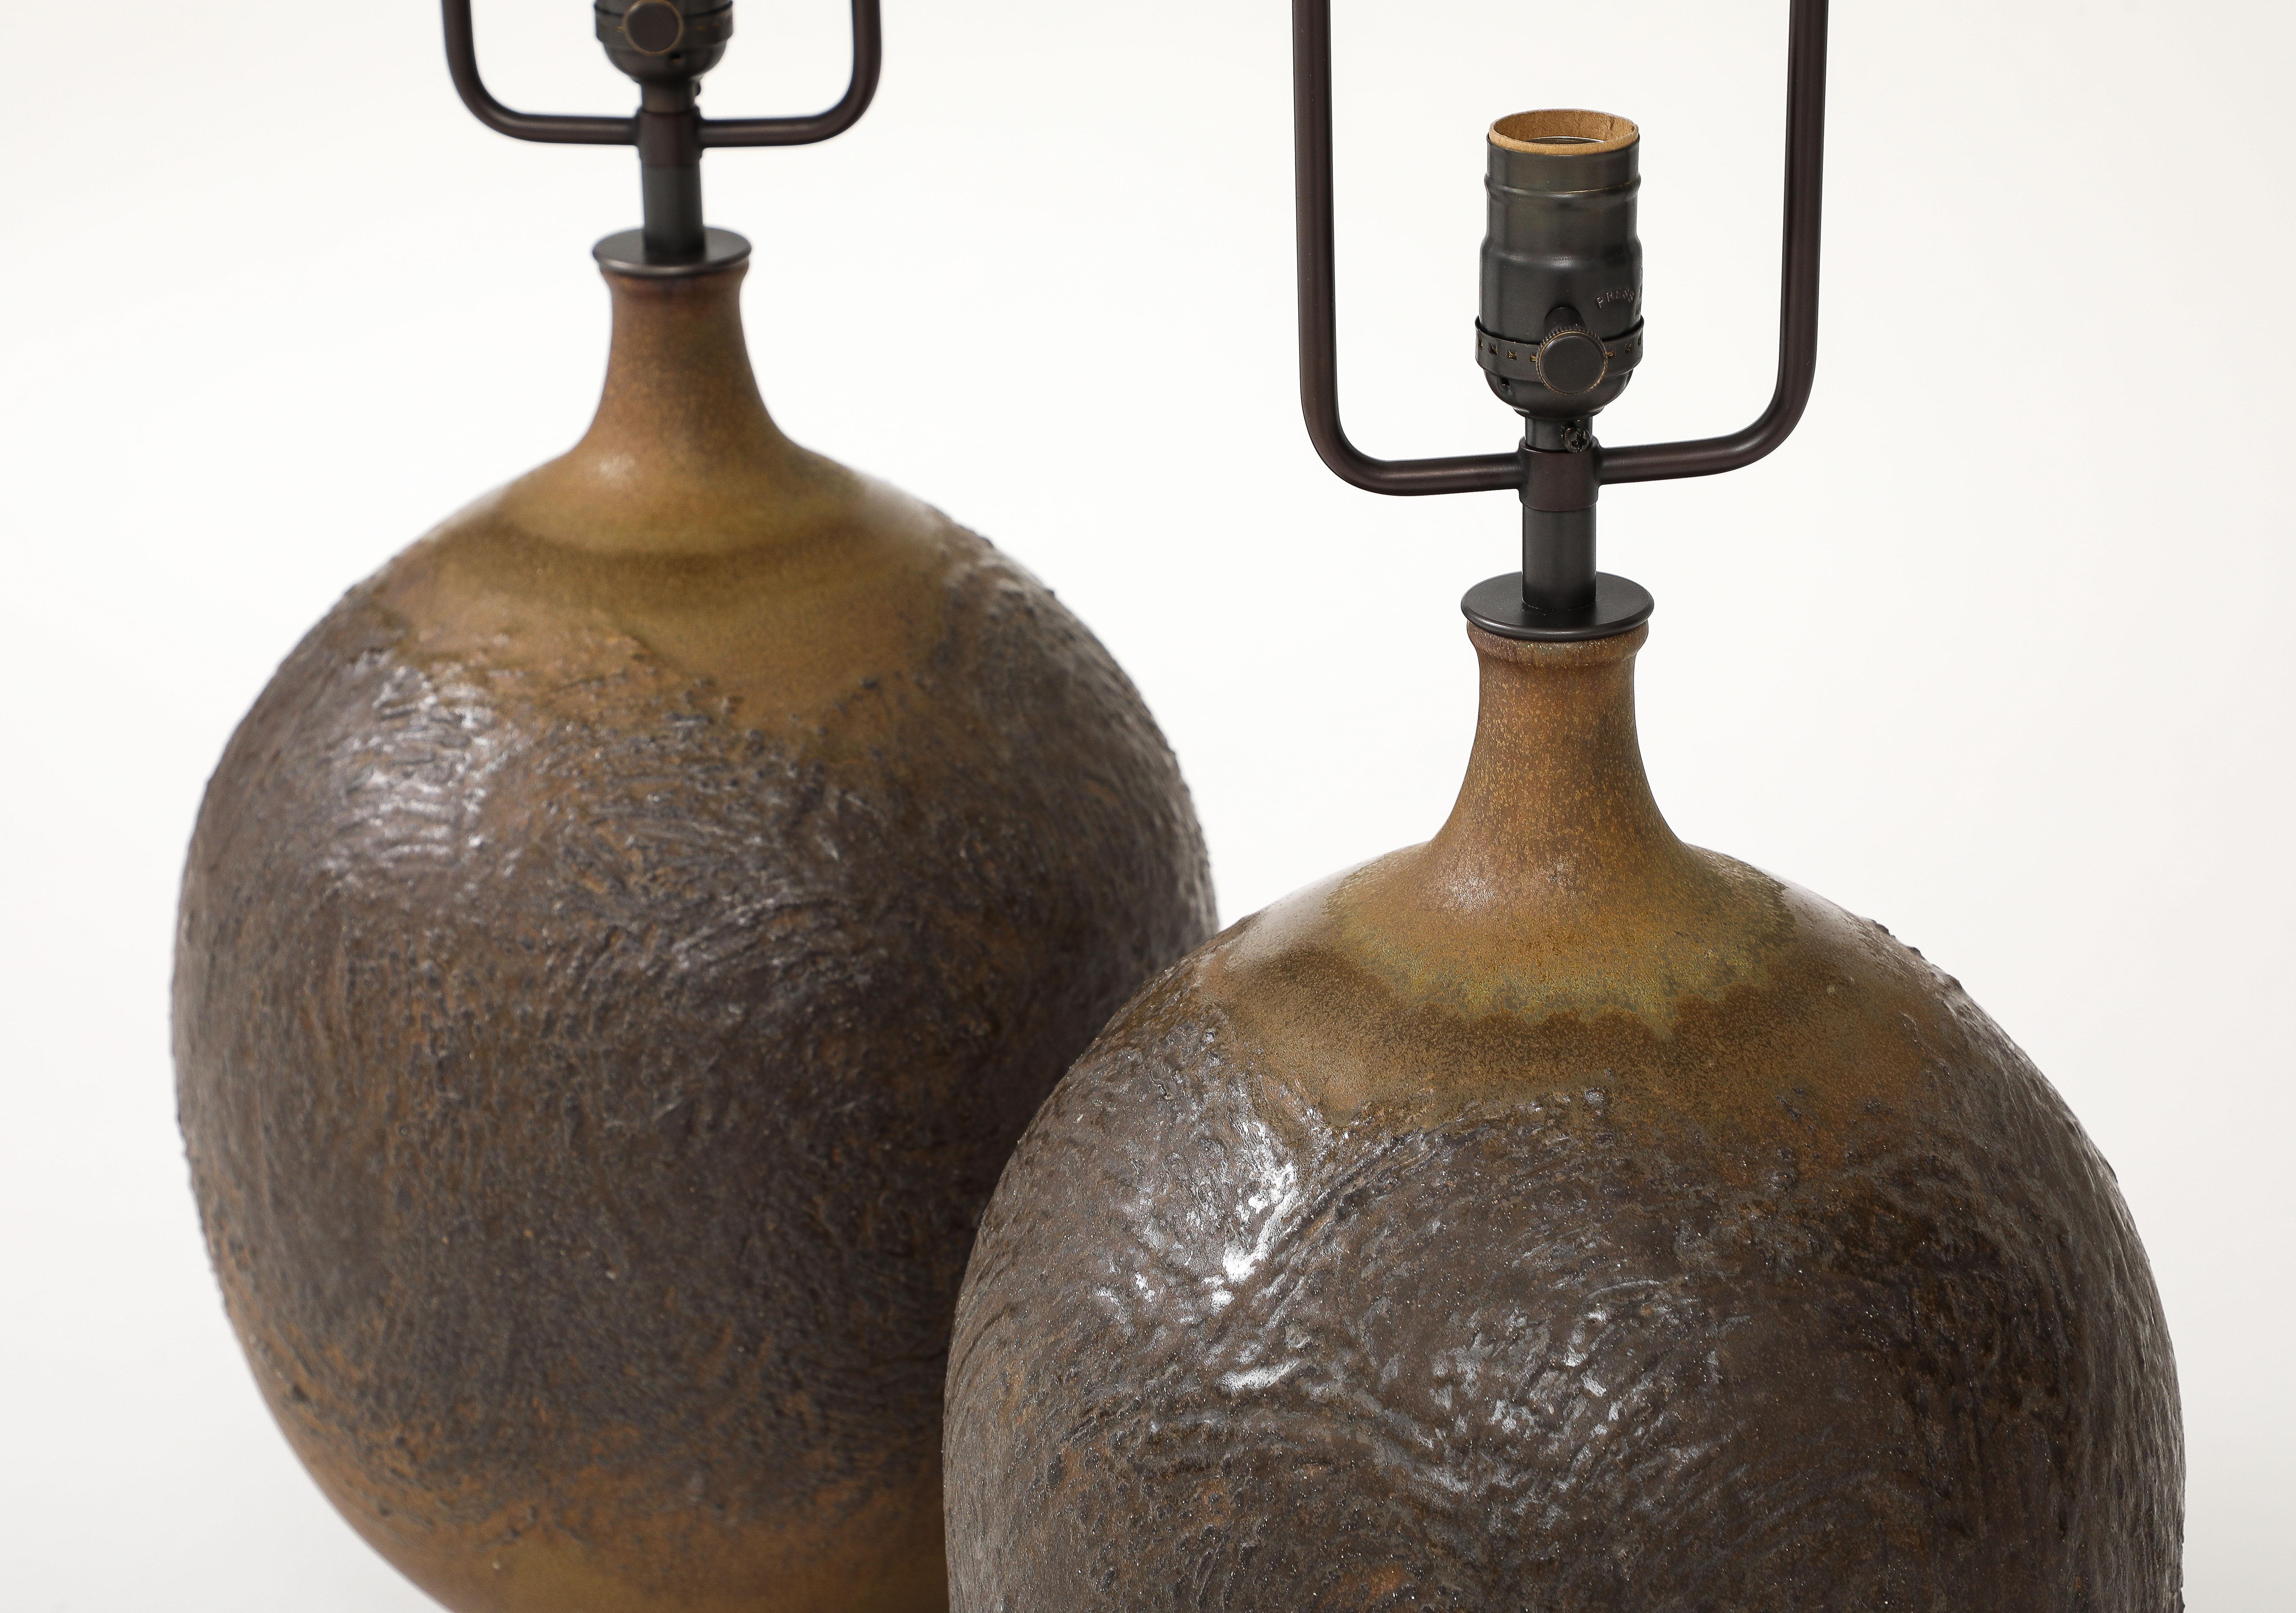 Pair of Glazed Ceramic Lamps by Design Technics, United States, c. 1950 For Sale 1